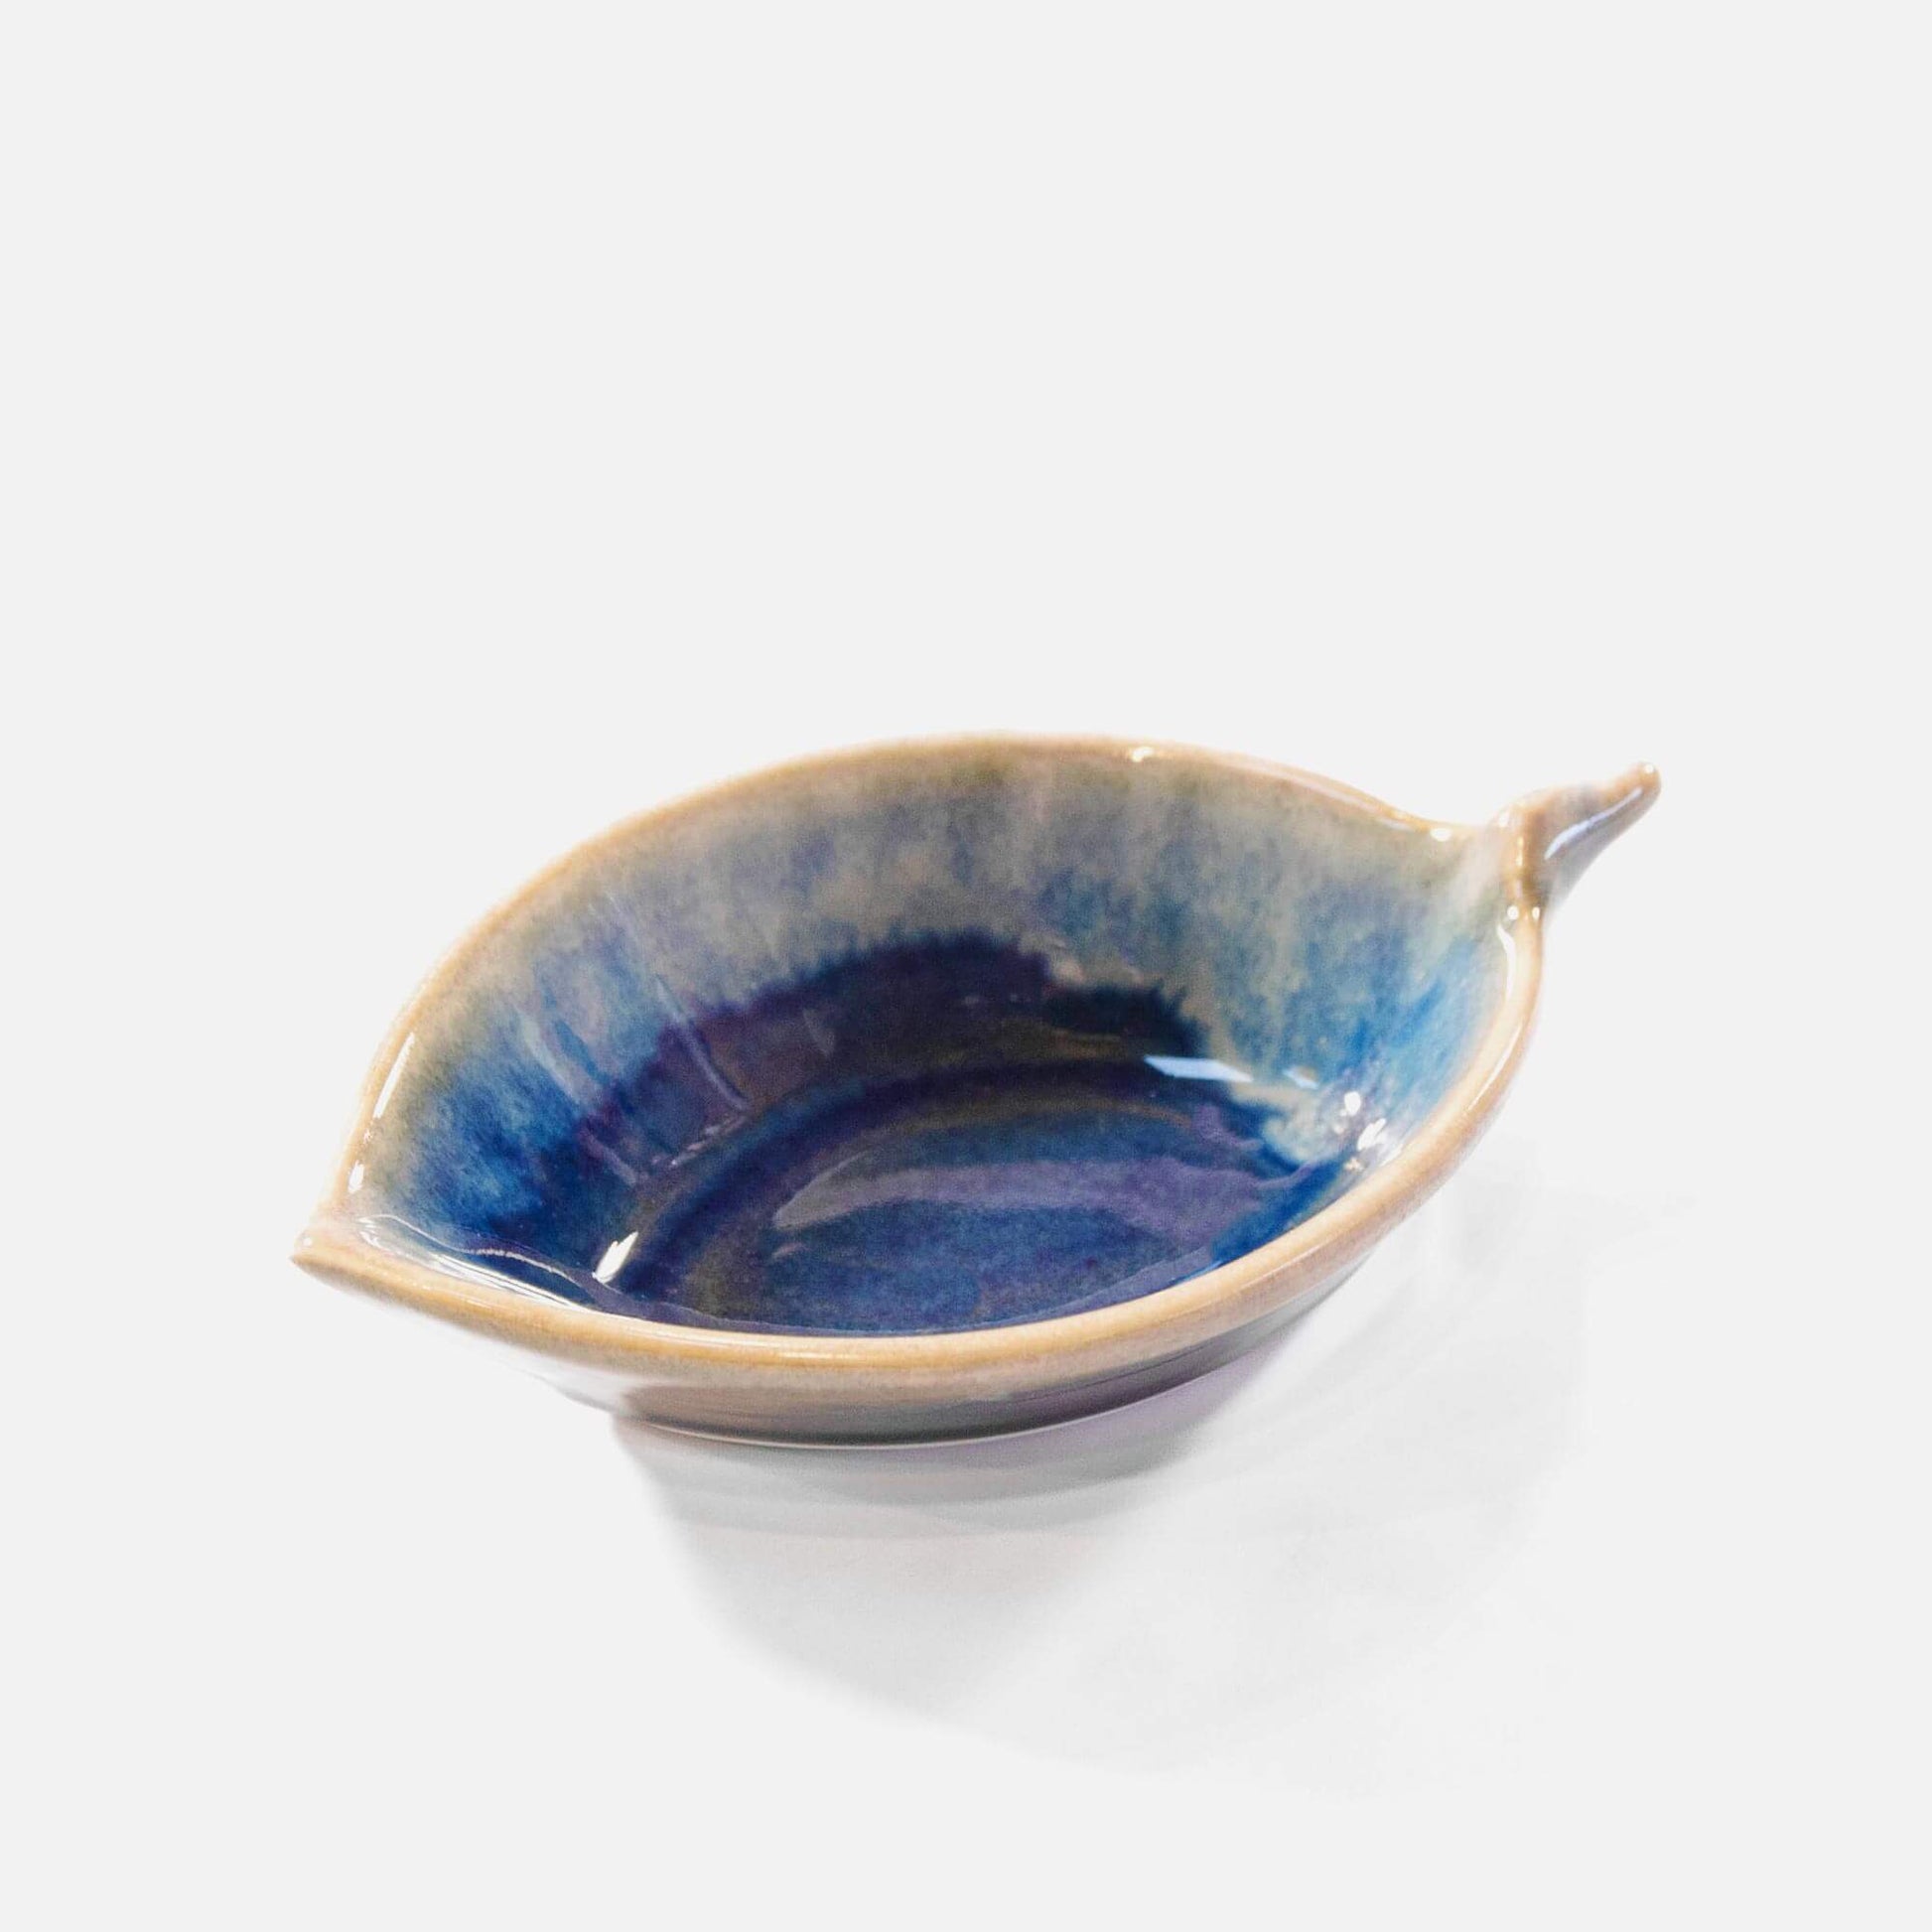 Handmade Pottery Leaf Dish  in Cobalt made by Georgetown Pottery in Maine